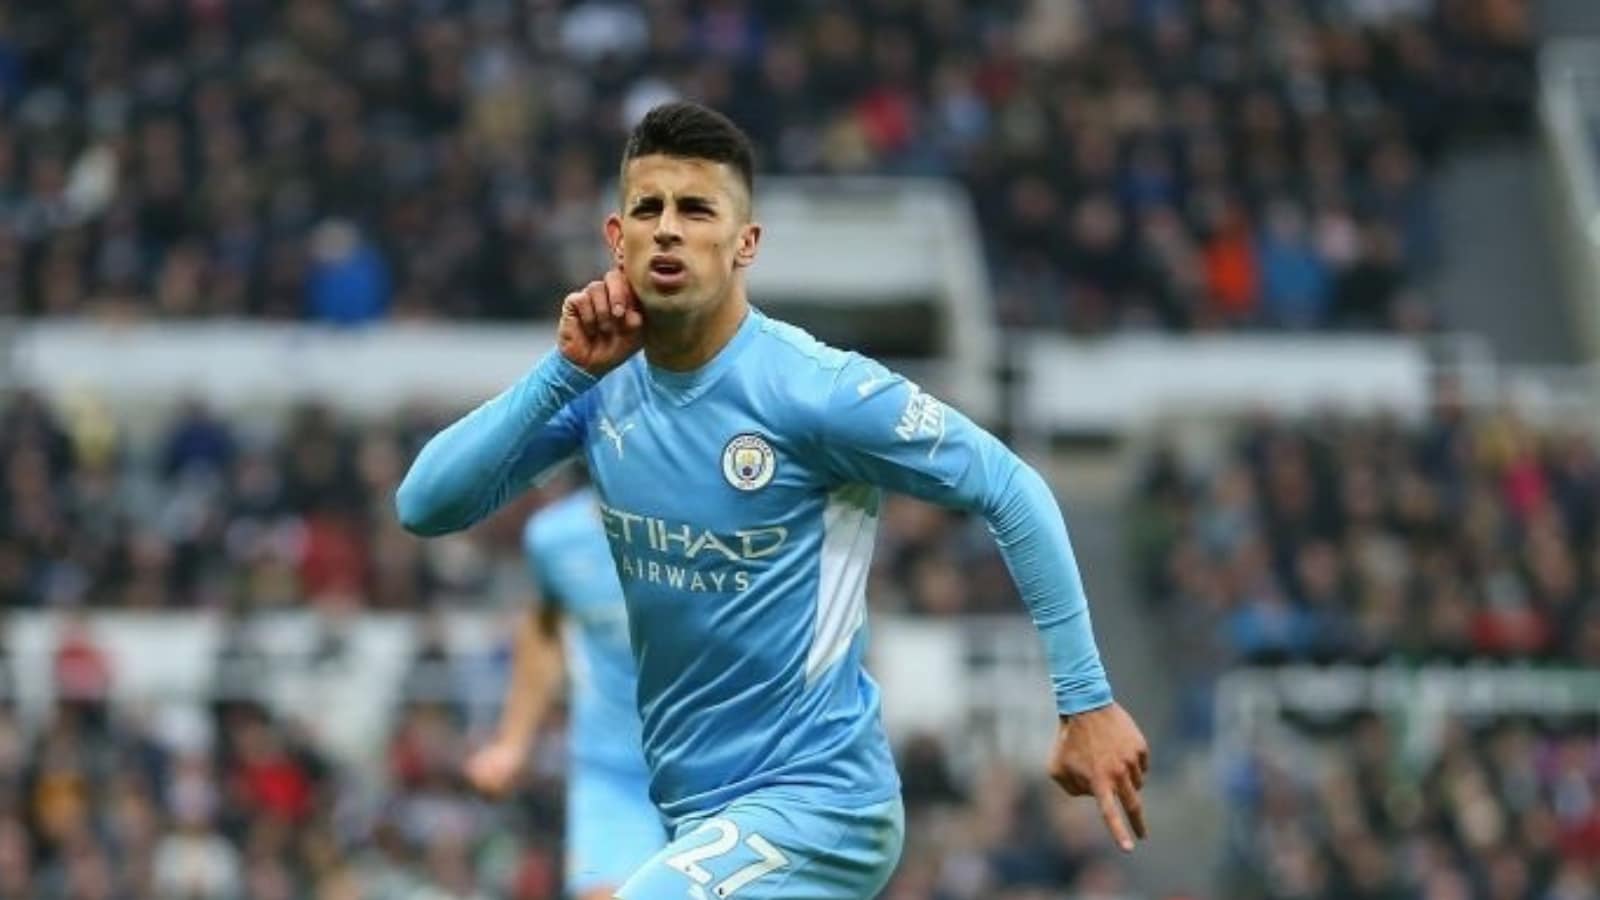 Transfer News: Joao Cancelo Signs Contract Extension at Manchester City